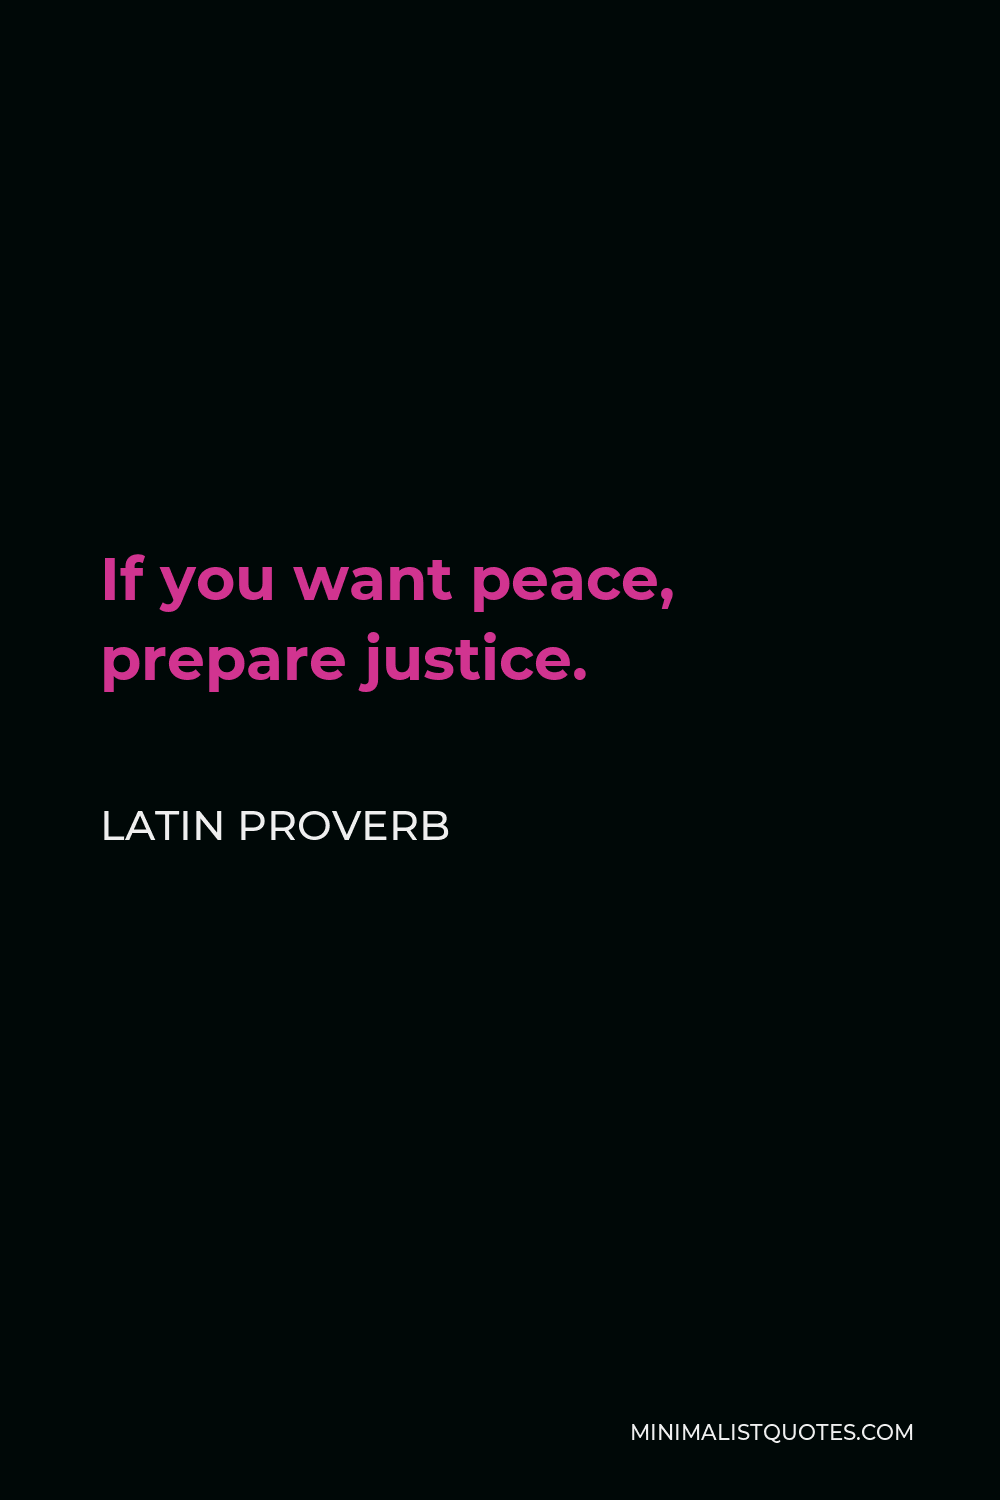 Latin Proverb Quote - If you want peace, prepare justice.